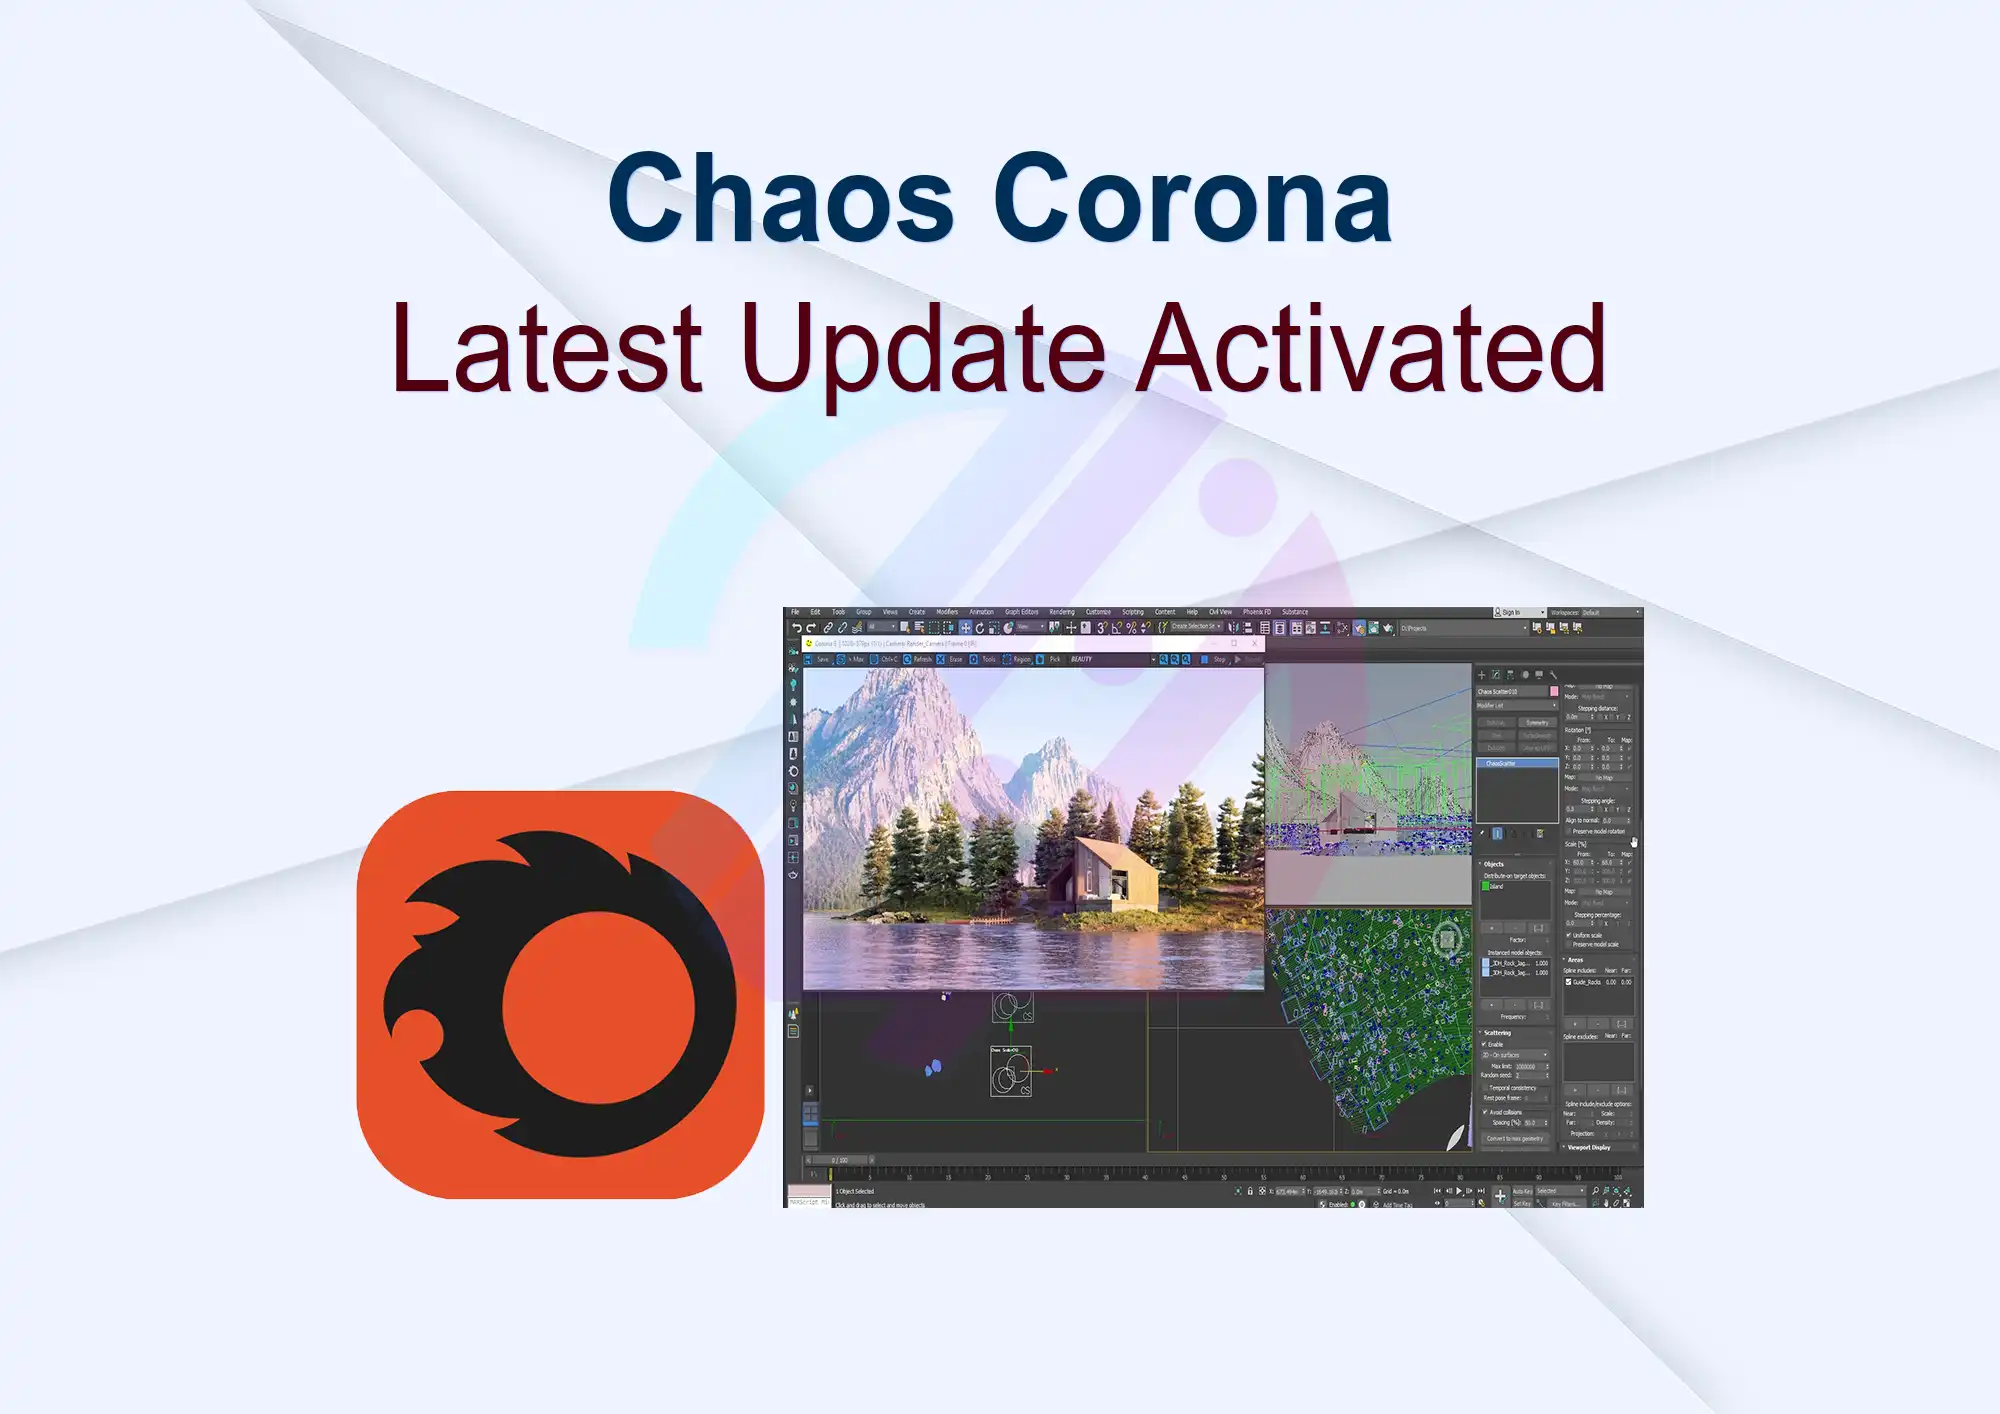 Chaos Corona Latest Update Activated